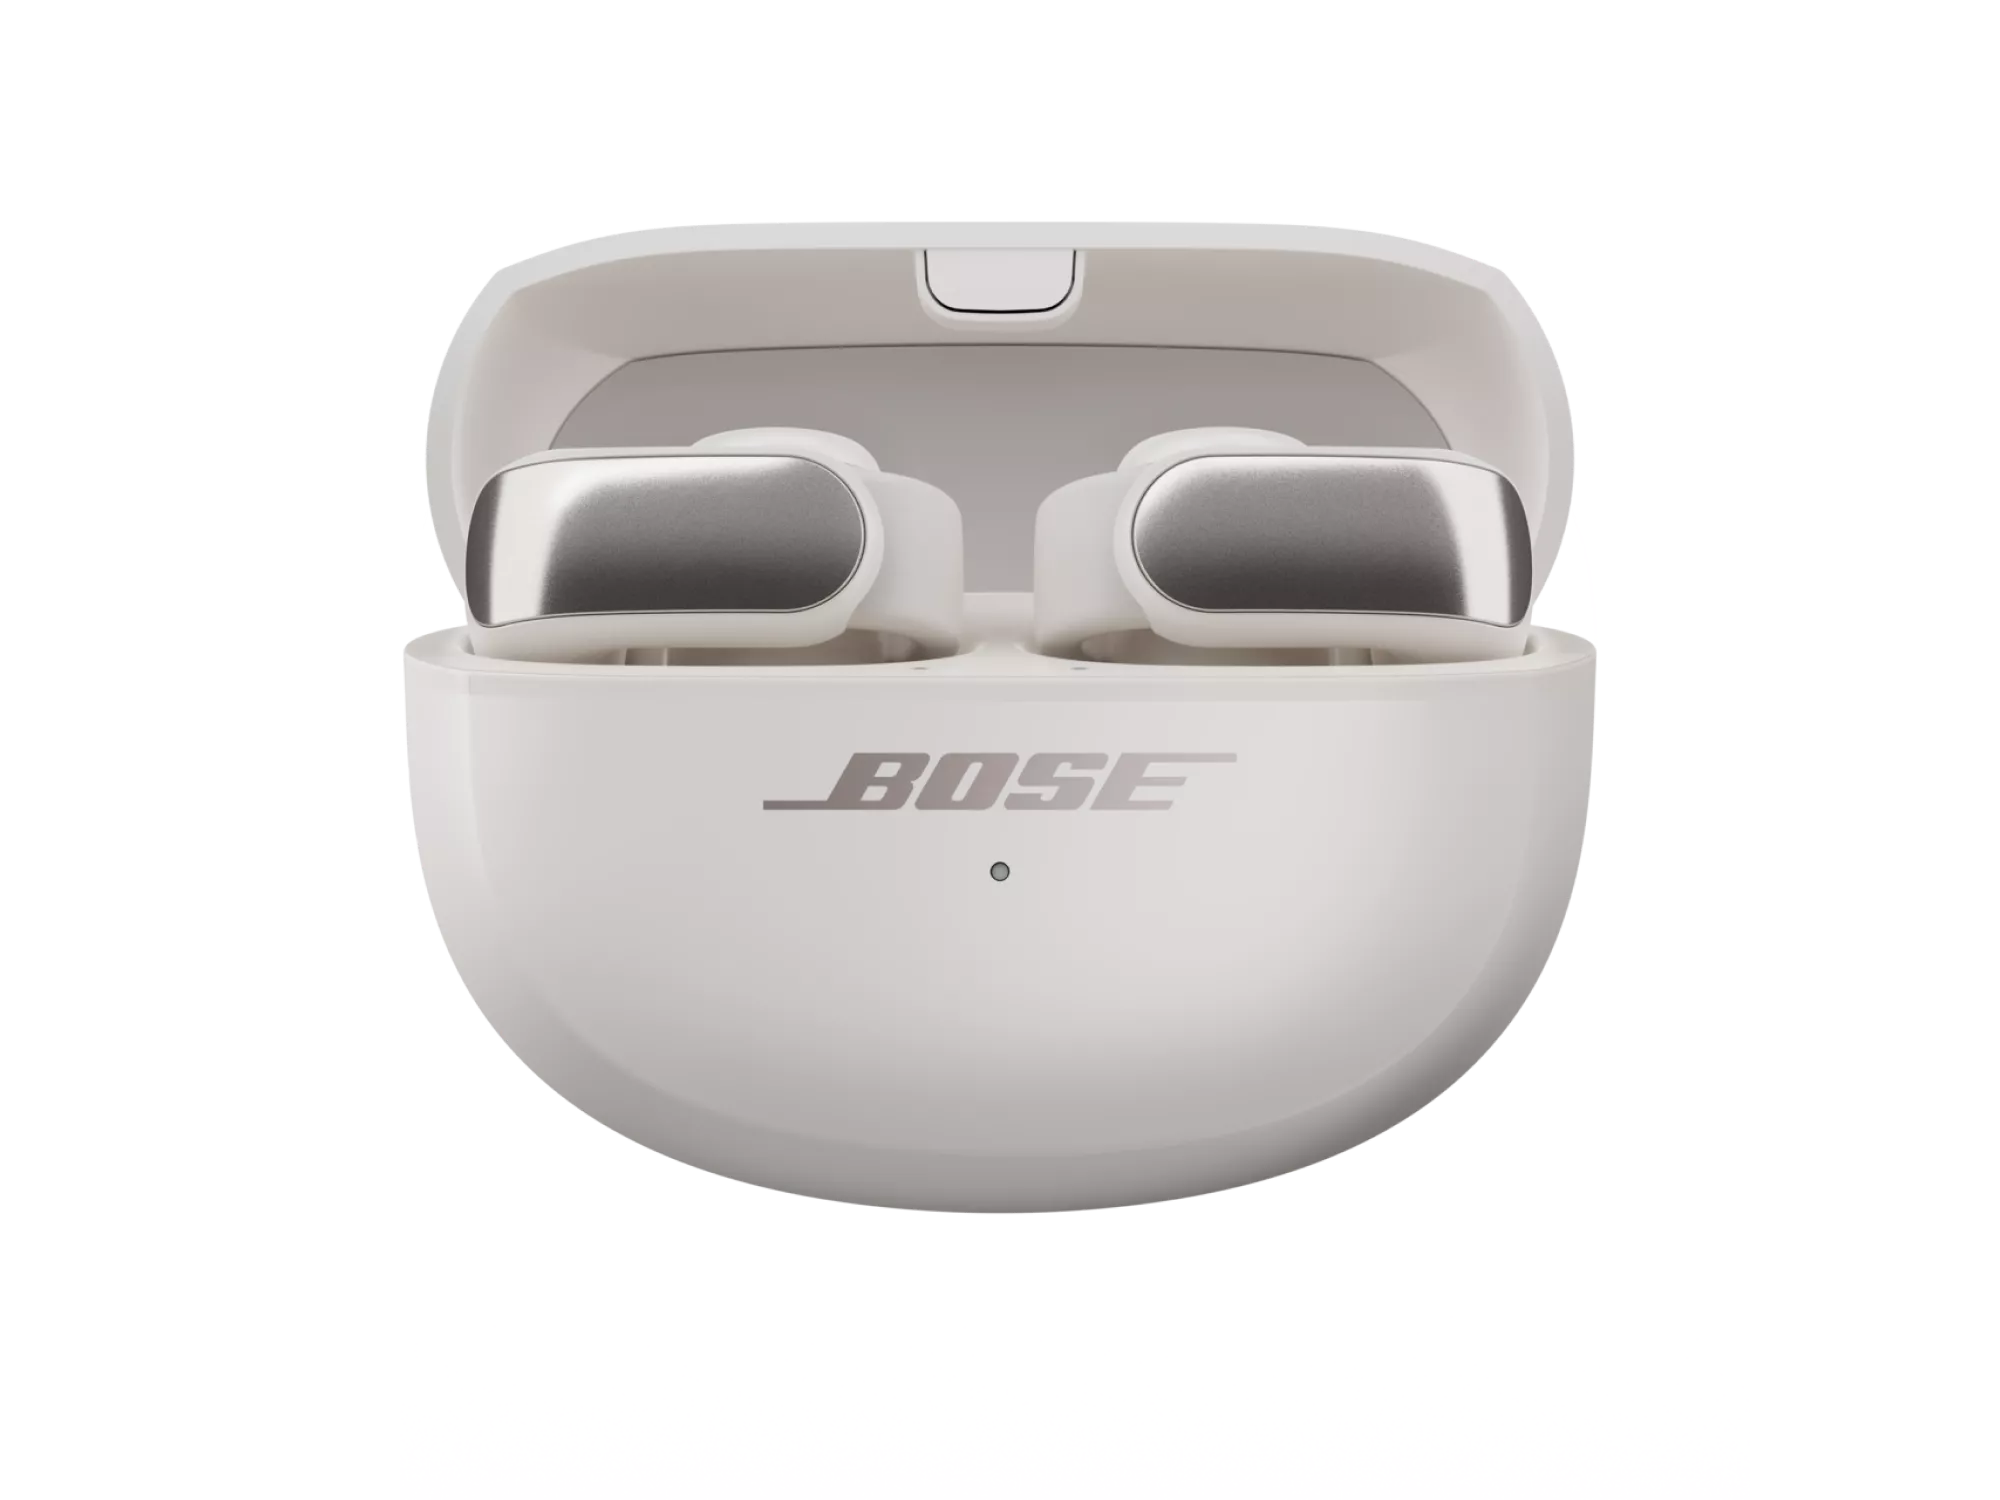 Bose Ultra Open Earbuds in their charging case